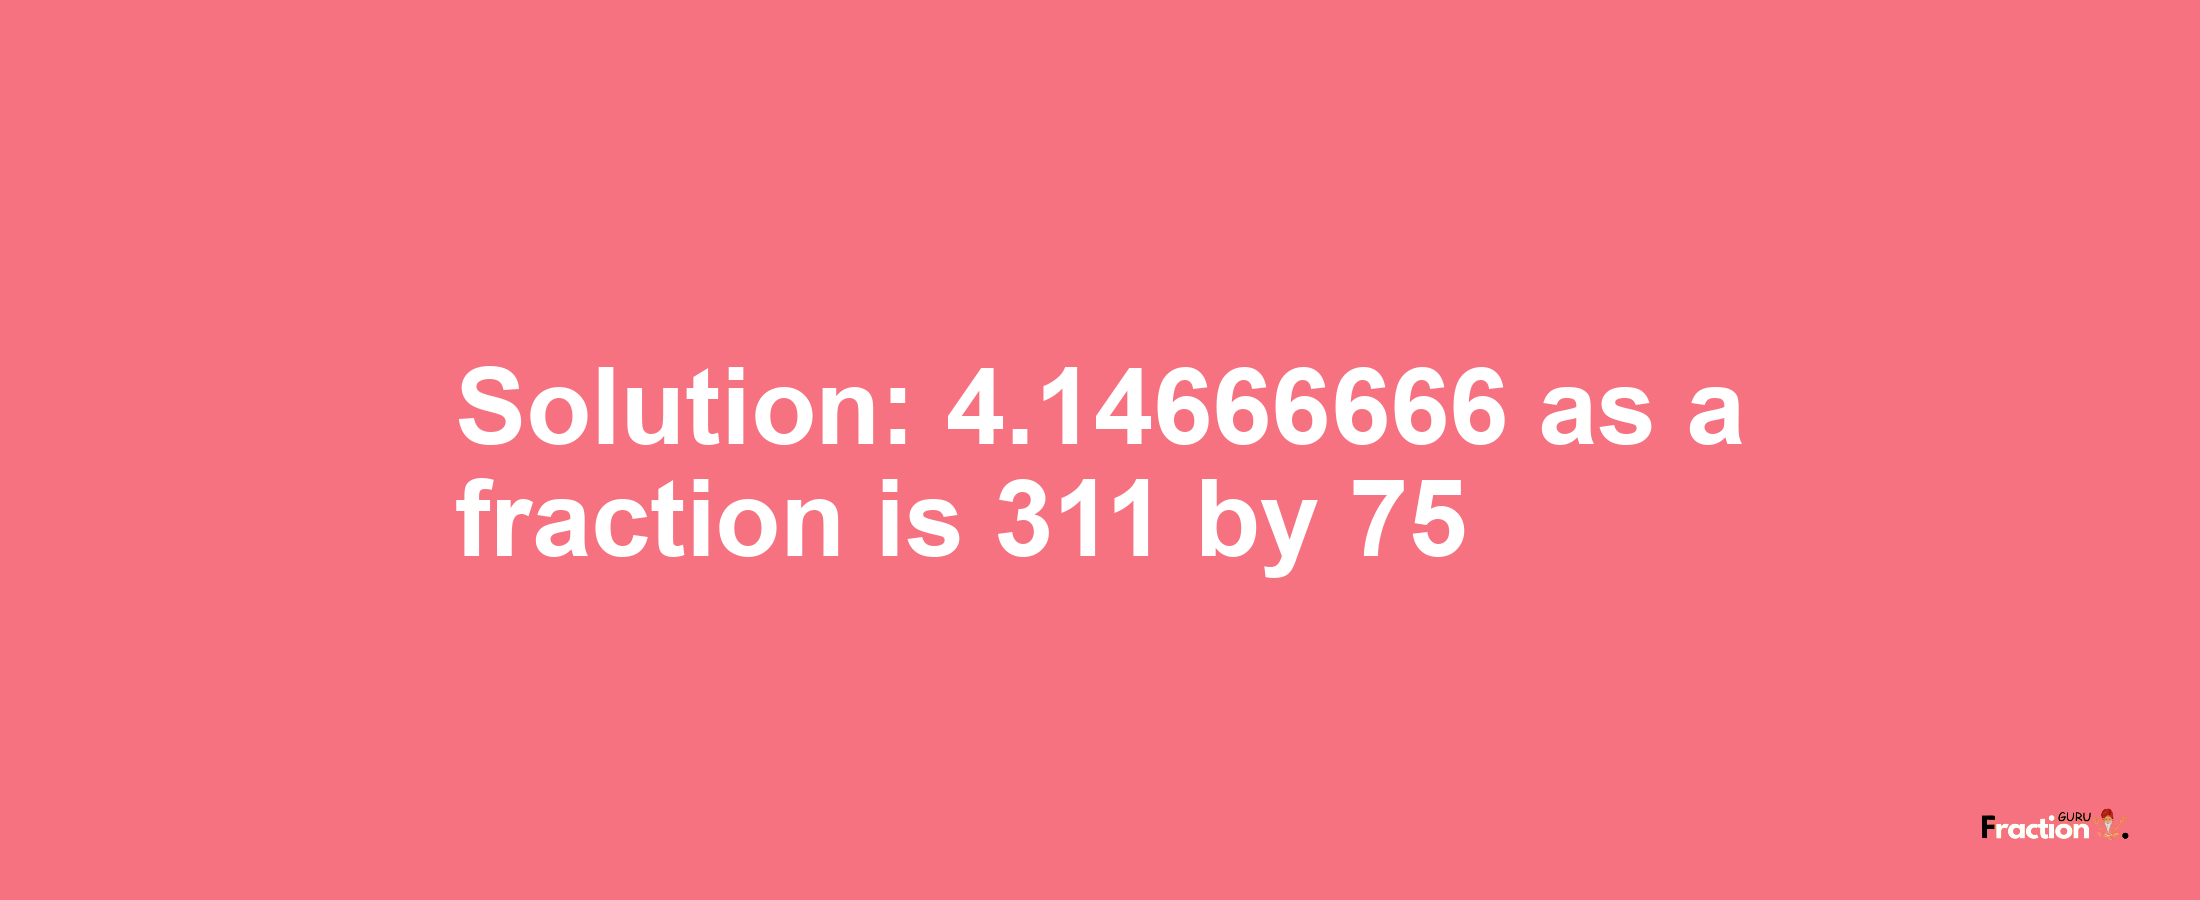 Solution:4.14666666 as a fraction is 311/75